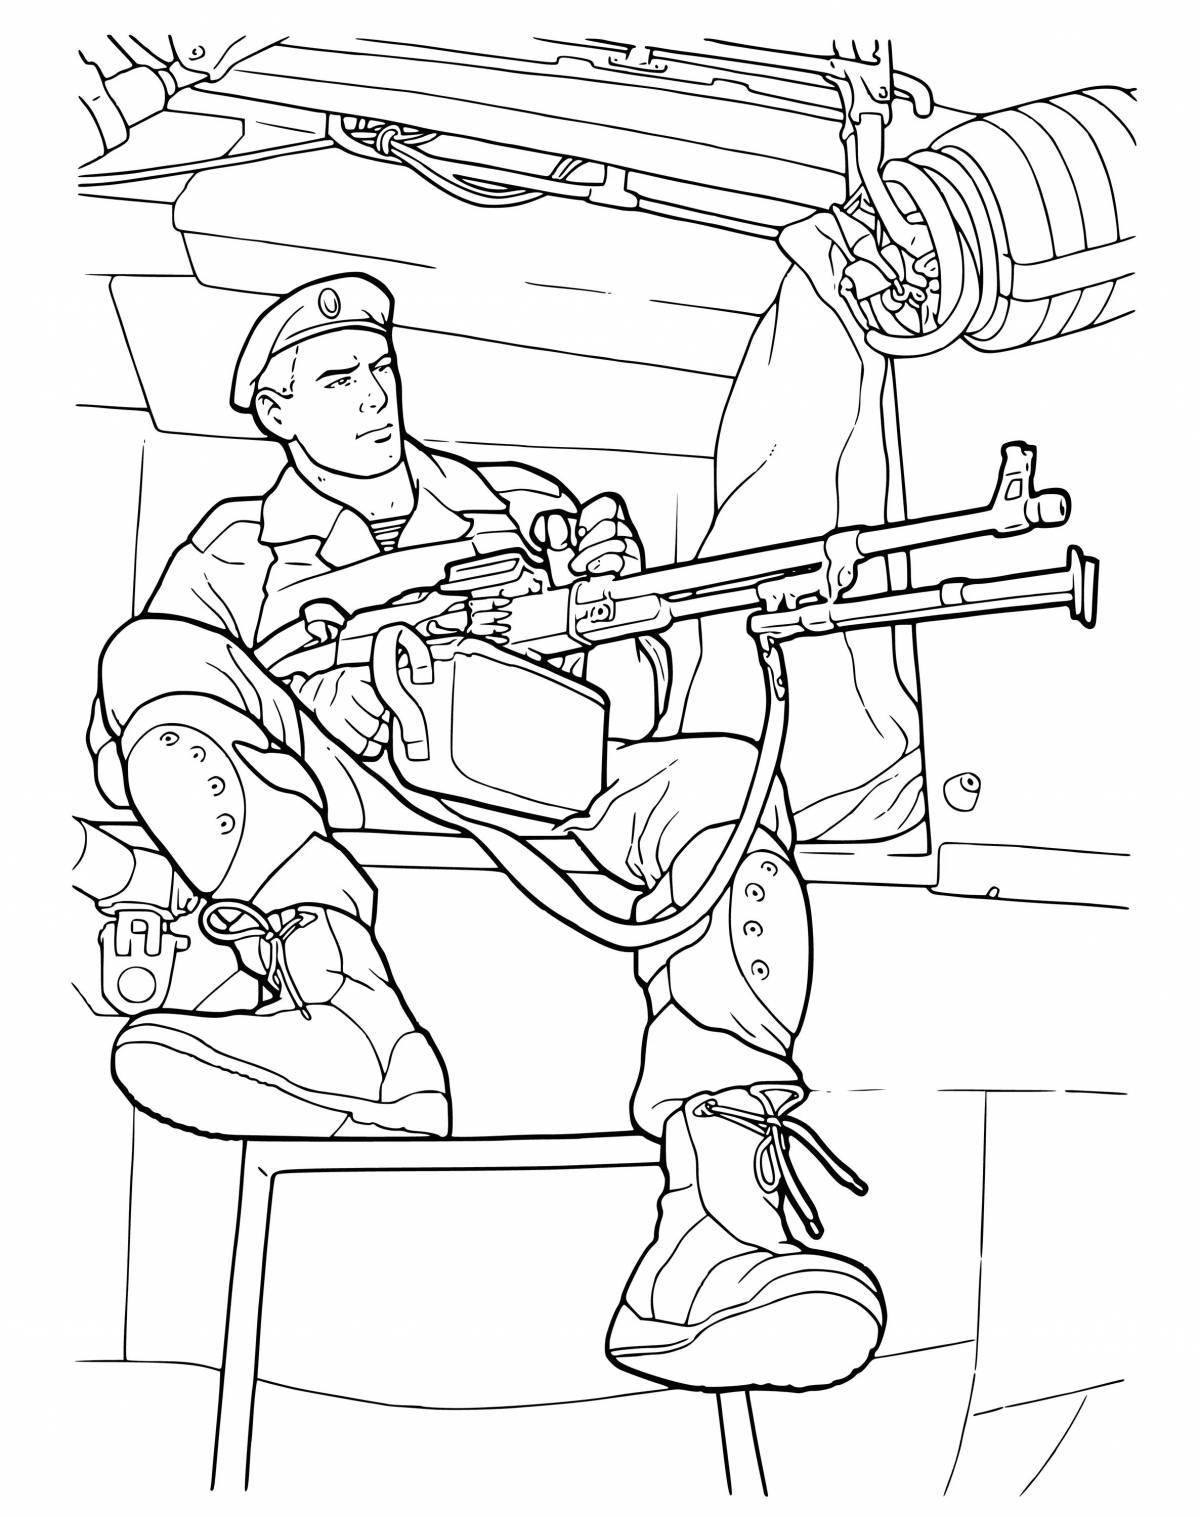 Coloring book brave Russian soldier